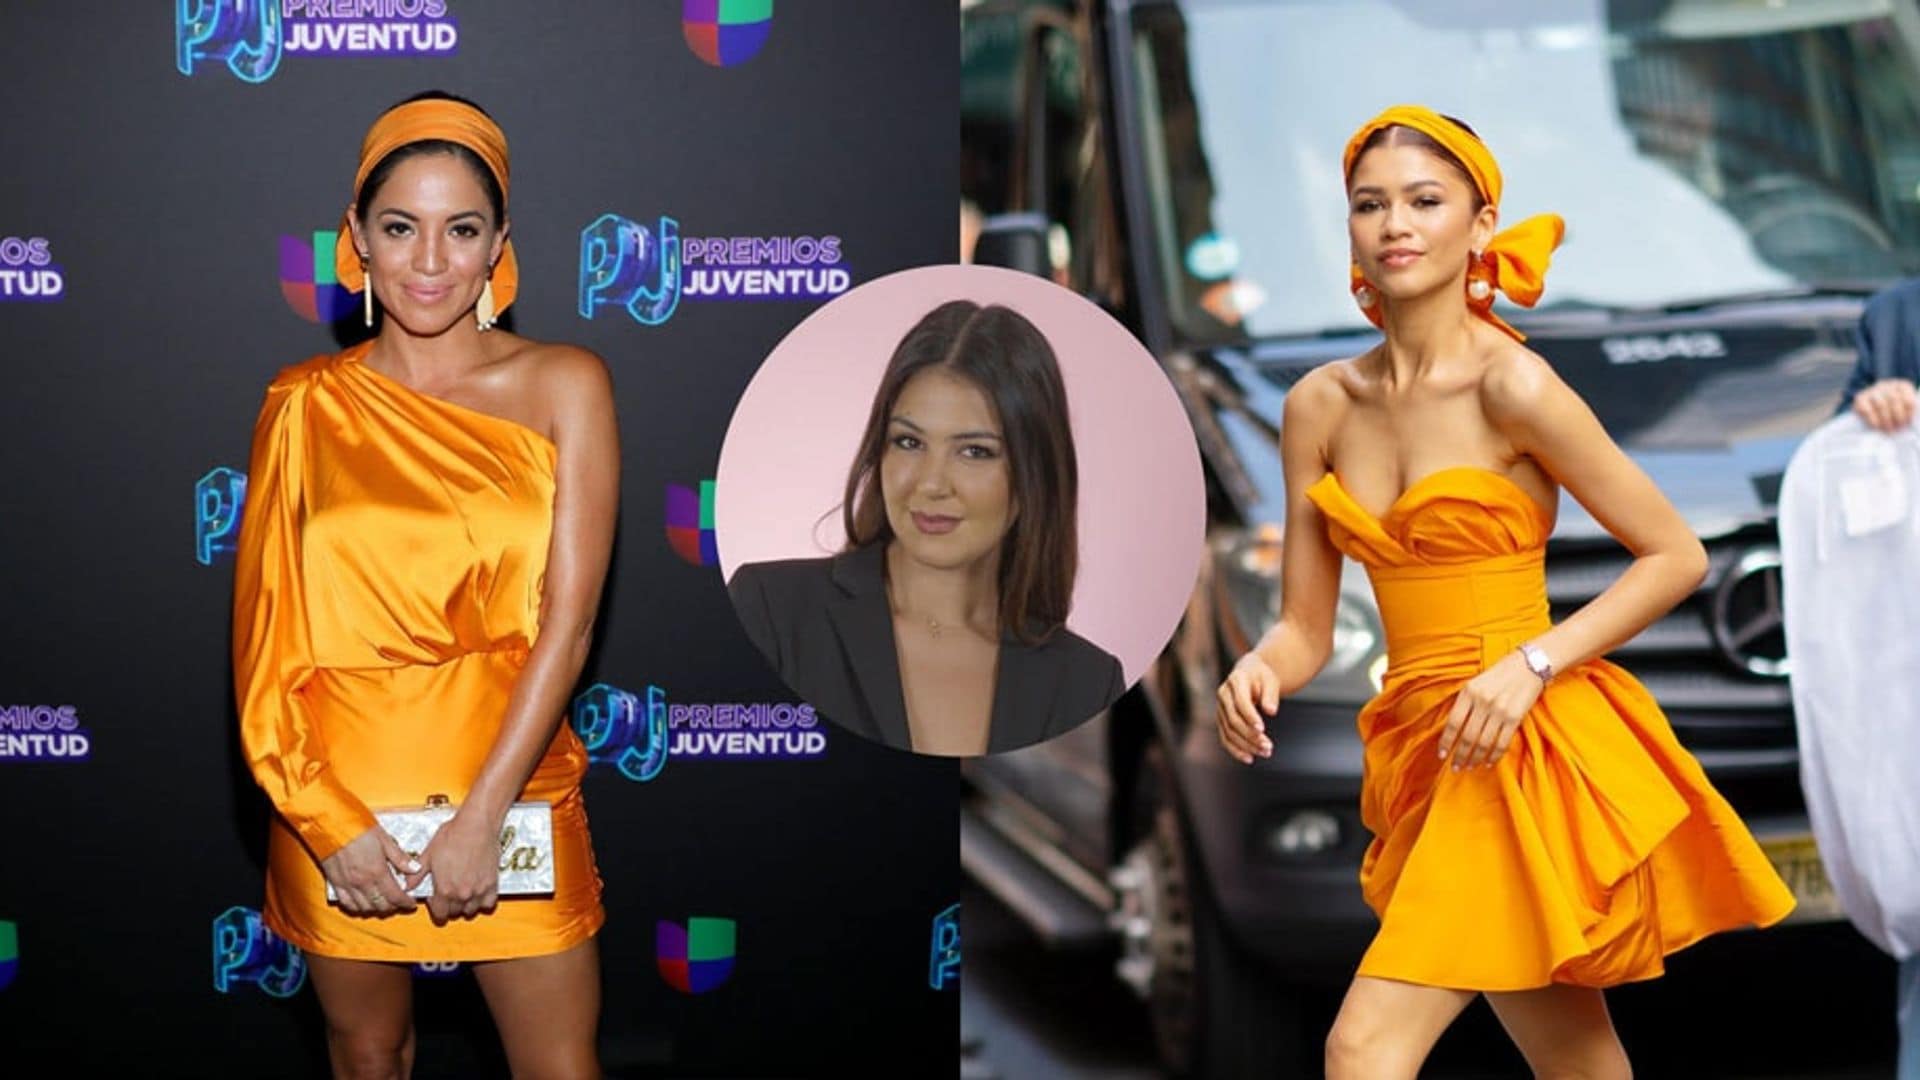 Whoops! Pamela Silva and Zendaya were spotted in the exact same look, who wore it better?